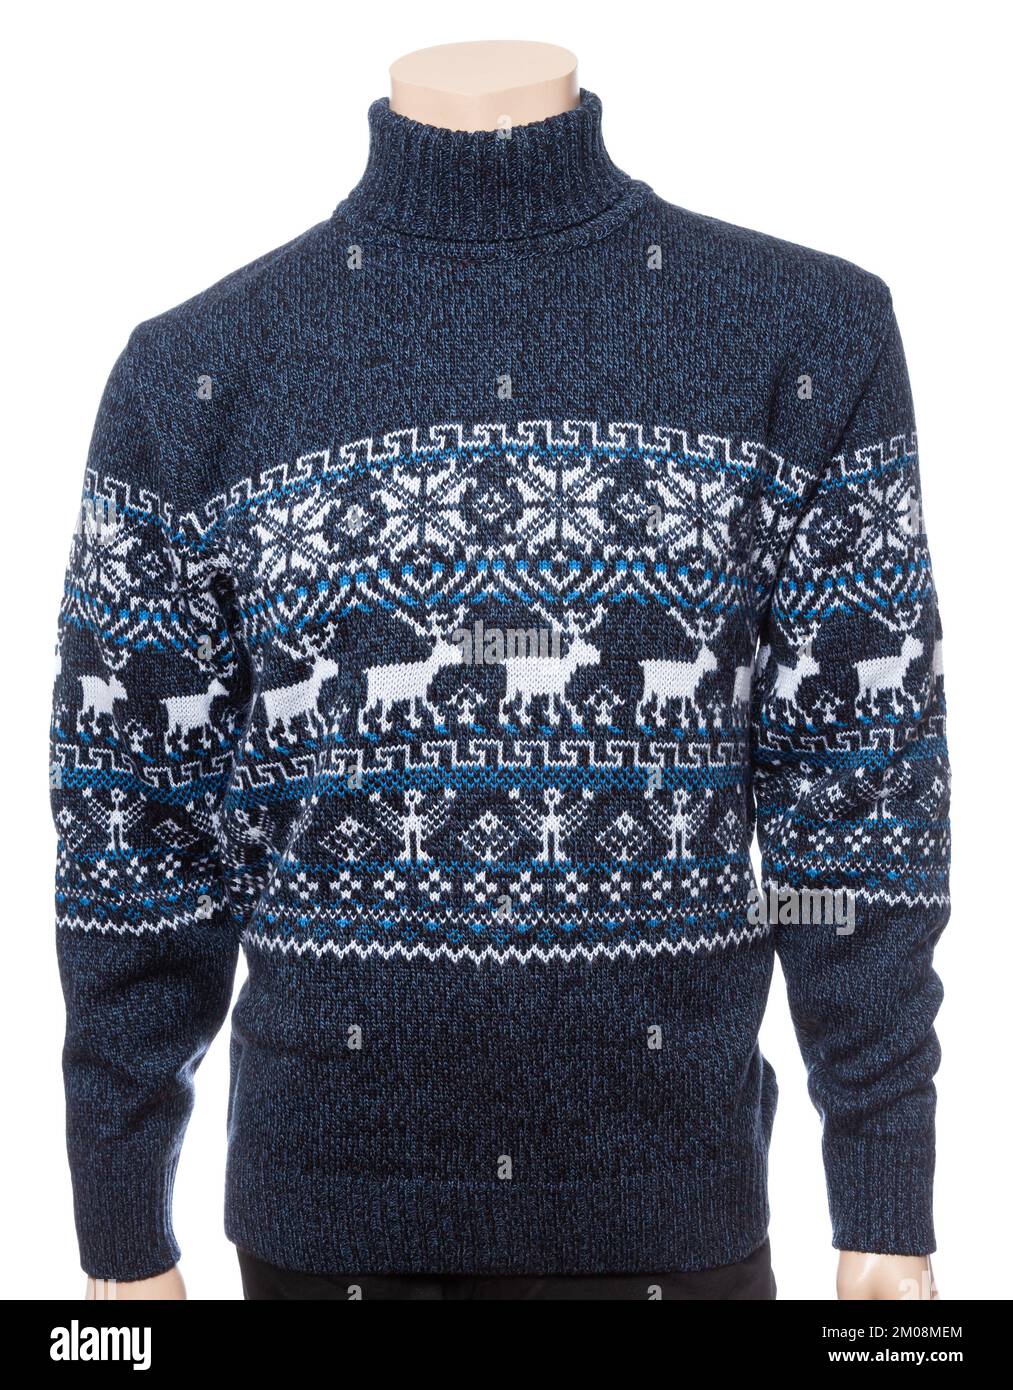 Blue knitted Christmas turtleneck sweater of traditional design with deer ornament (aka Ugly Sweater) on male mannequin isolated on a white background Stock Photo